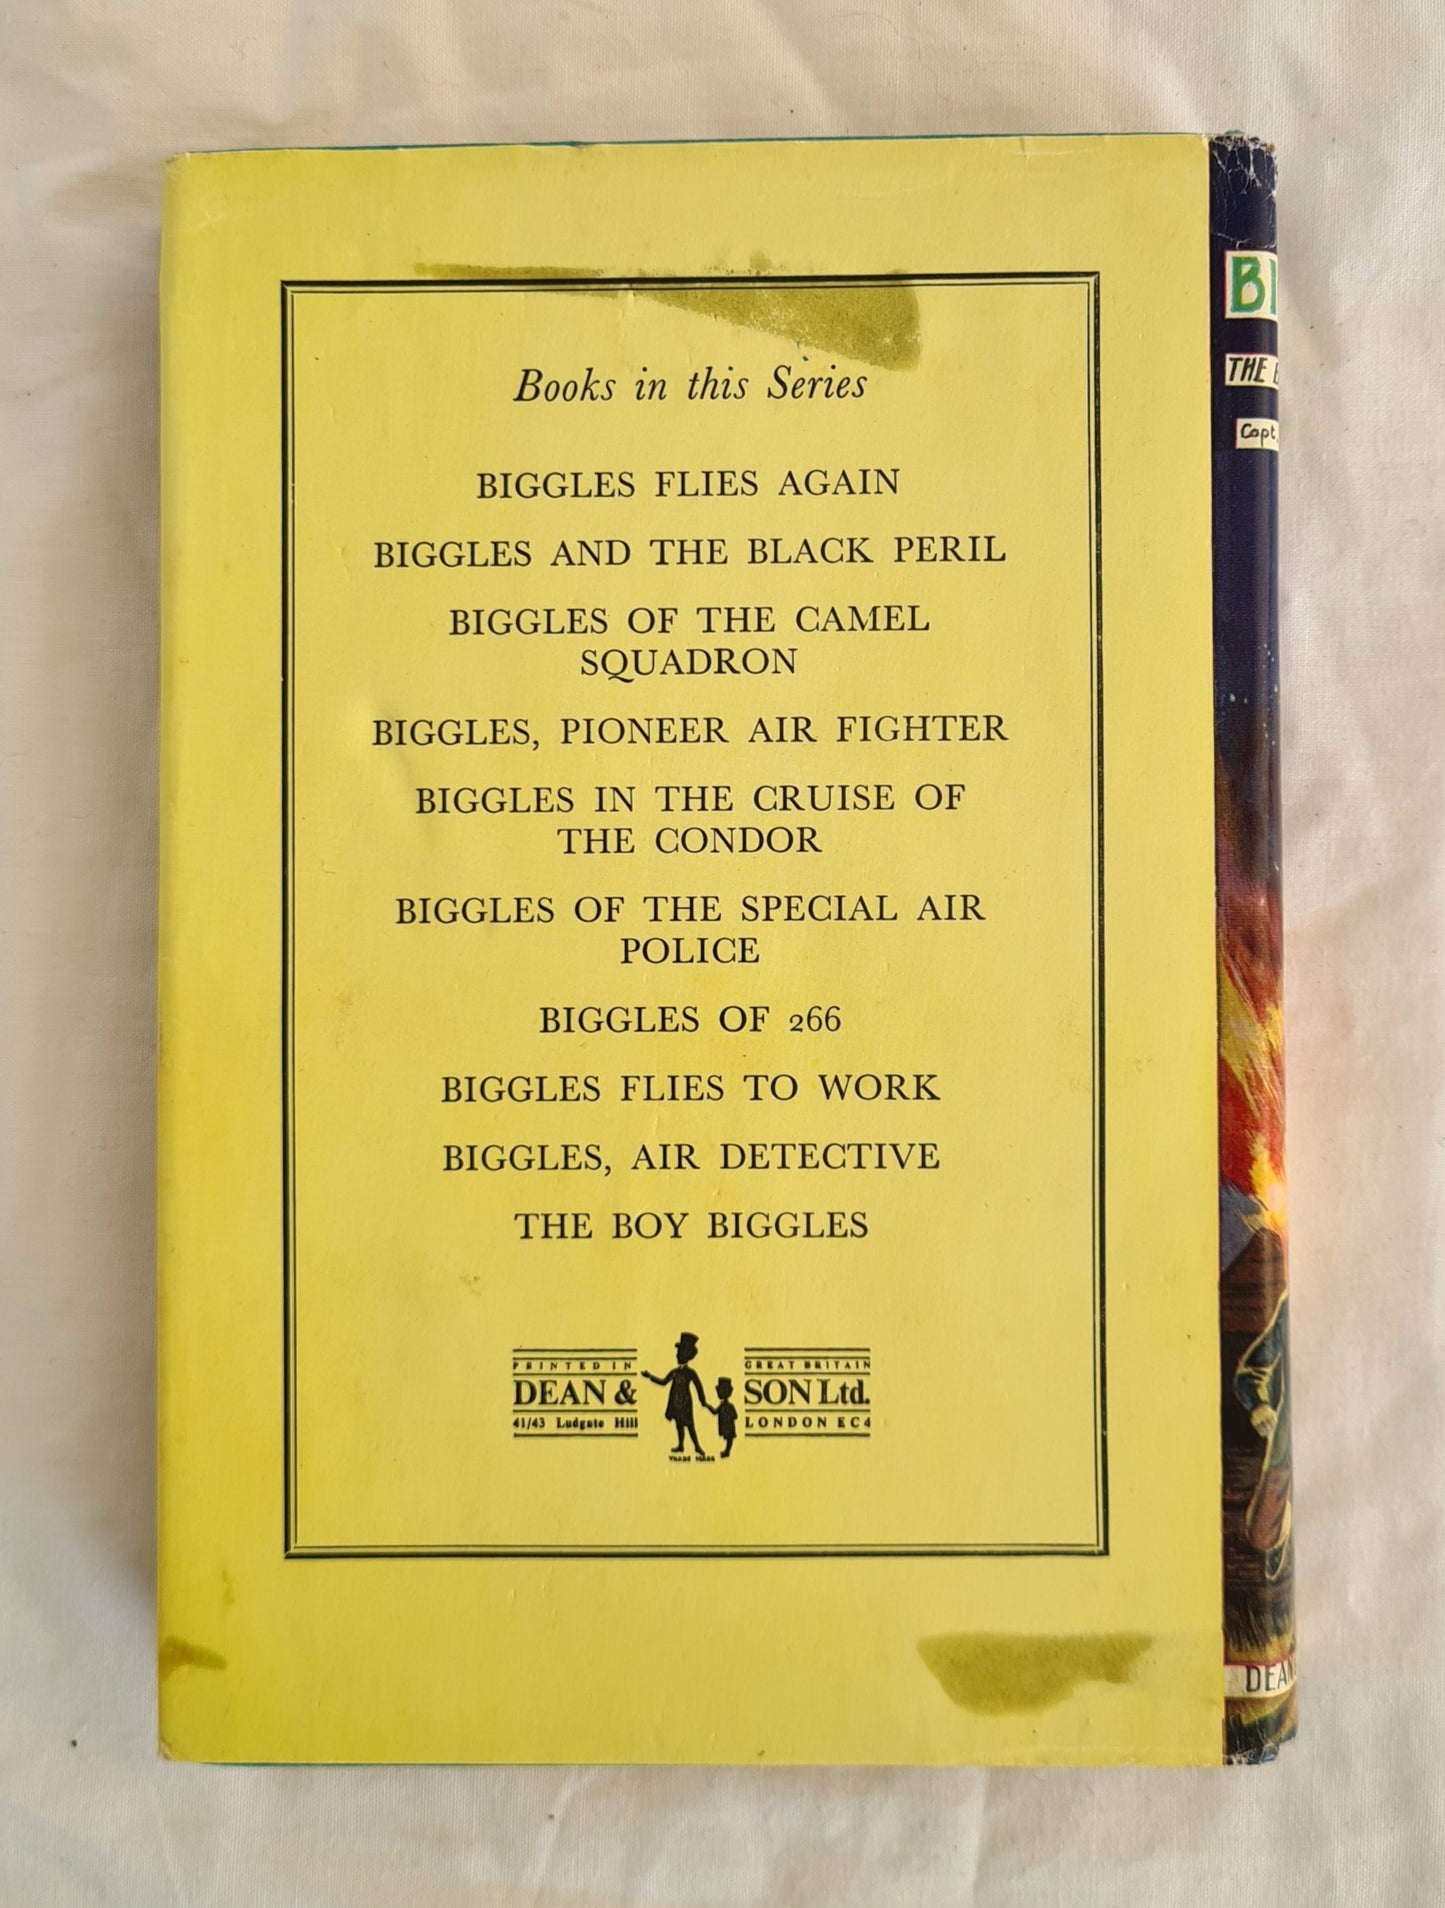 Biggles and the Black Peril by Captain W. E. Johns (dustjacket)